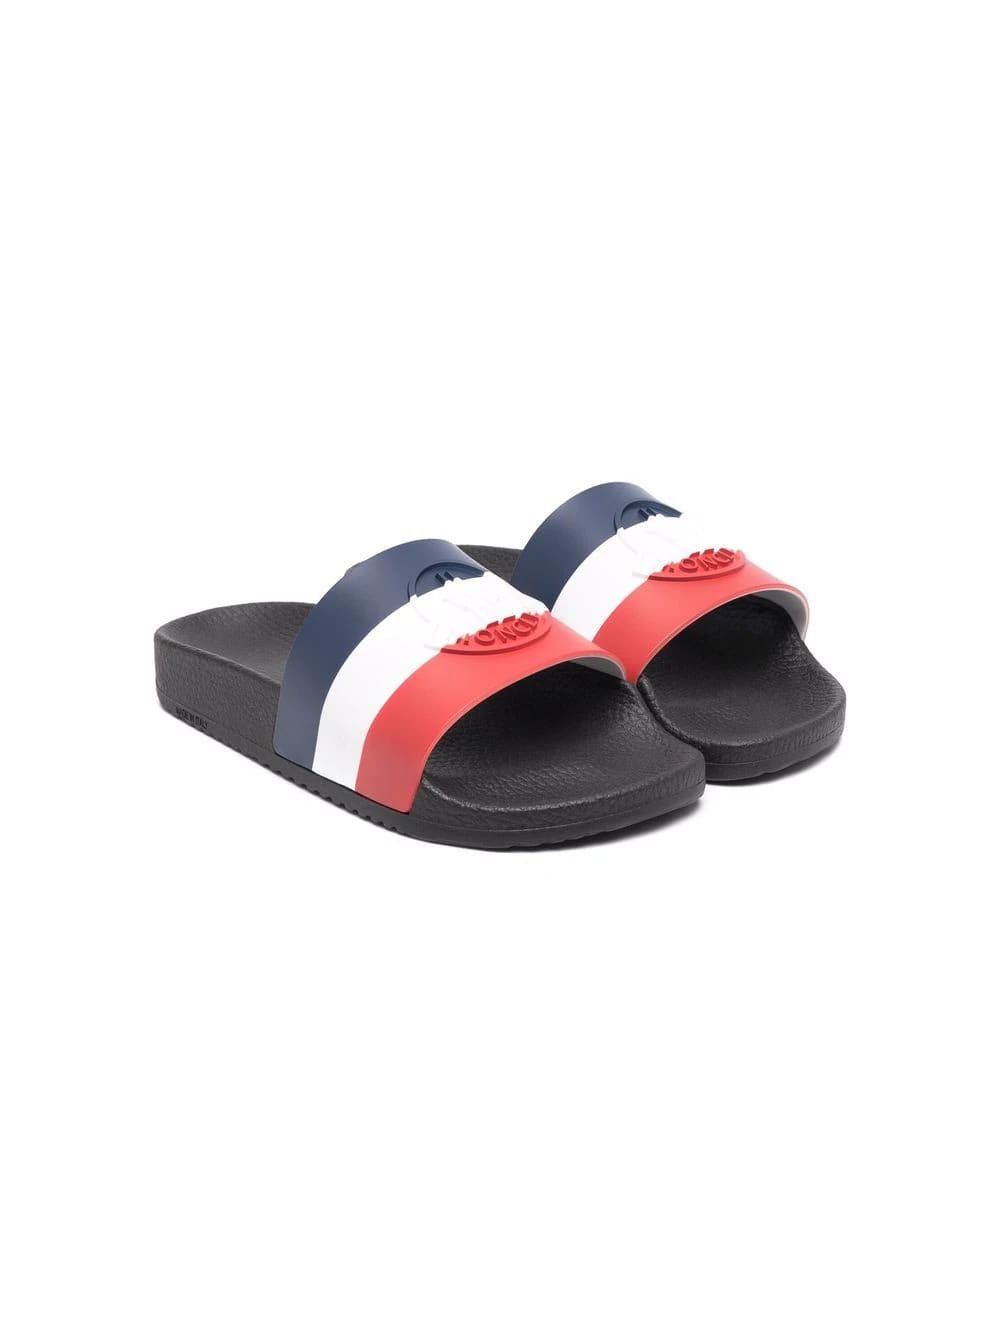 Moncler Kids Black Slipper With Tricolor Band